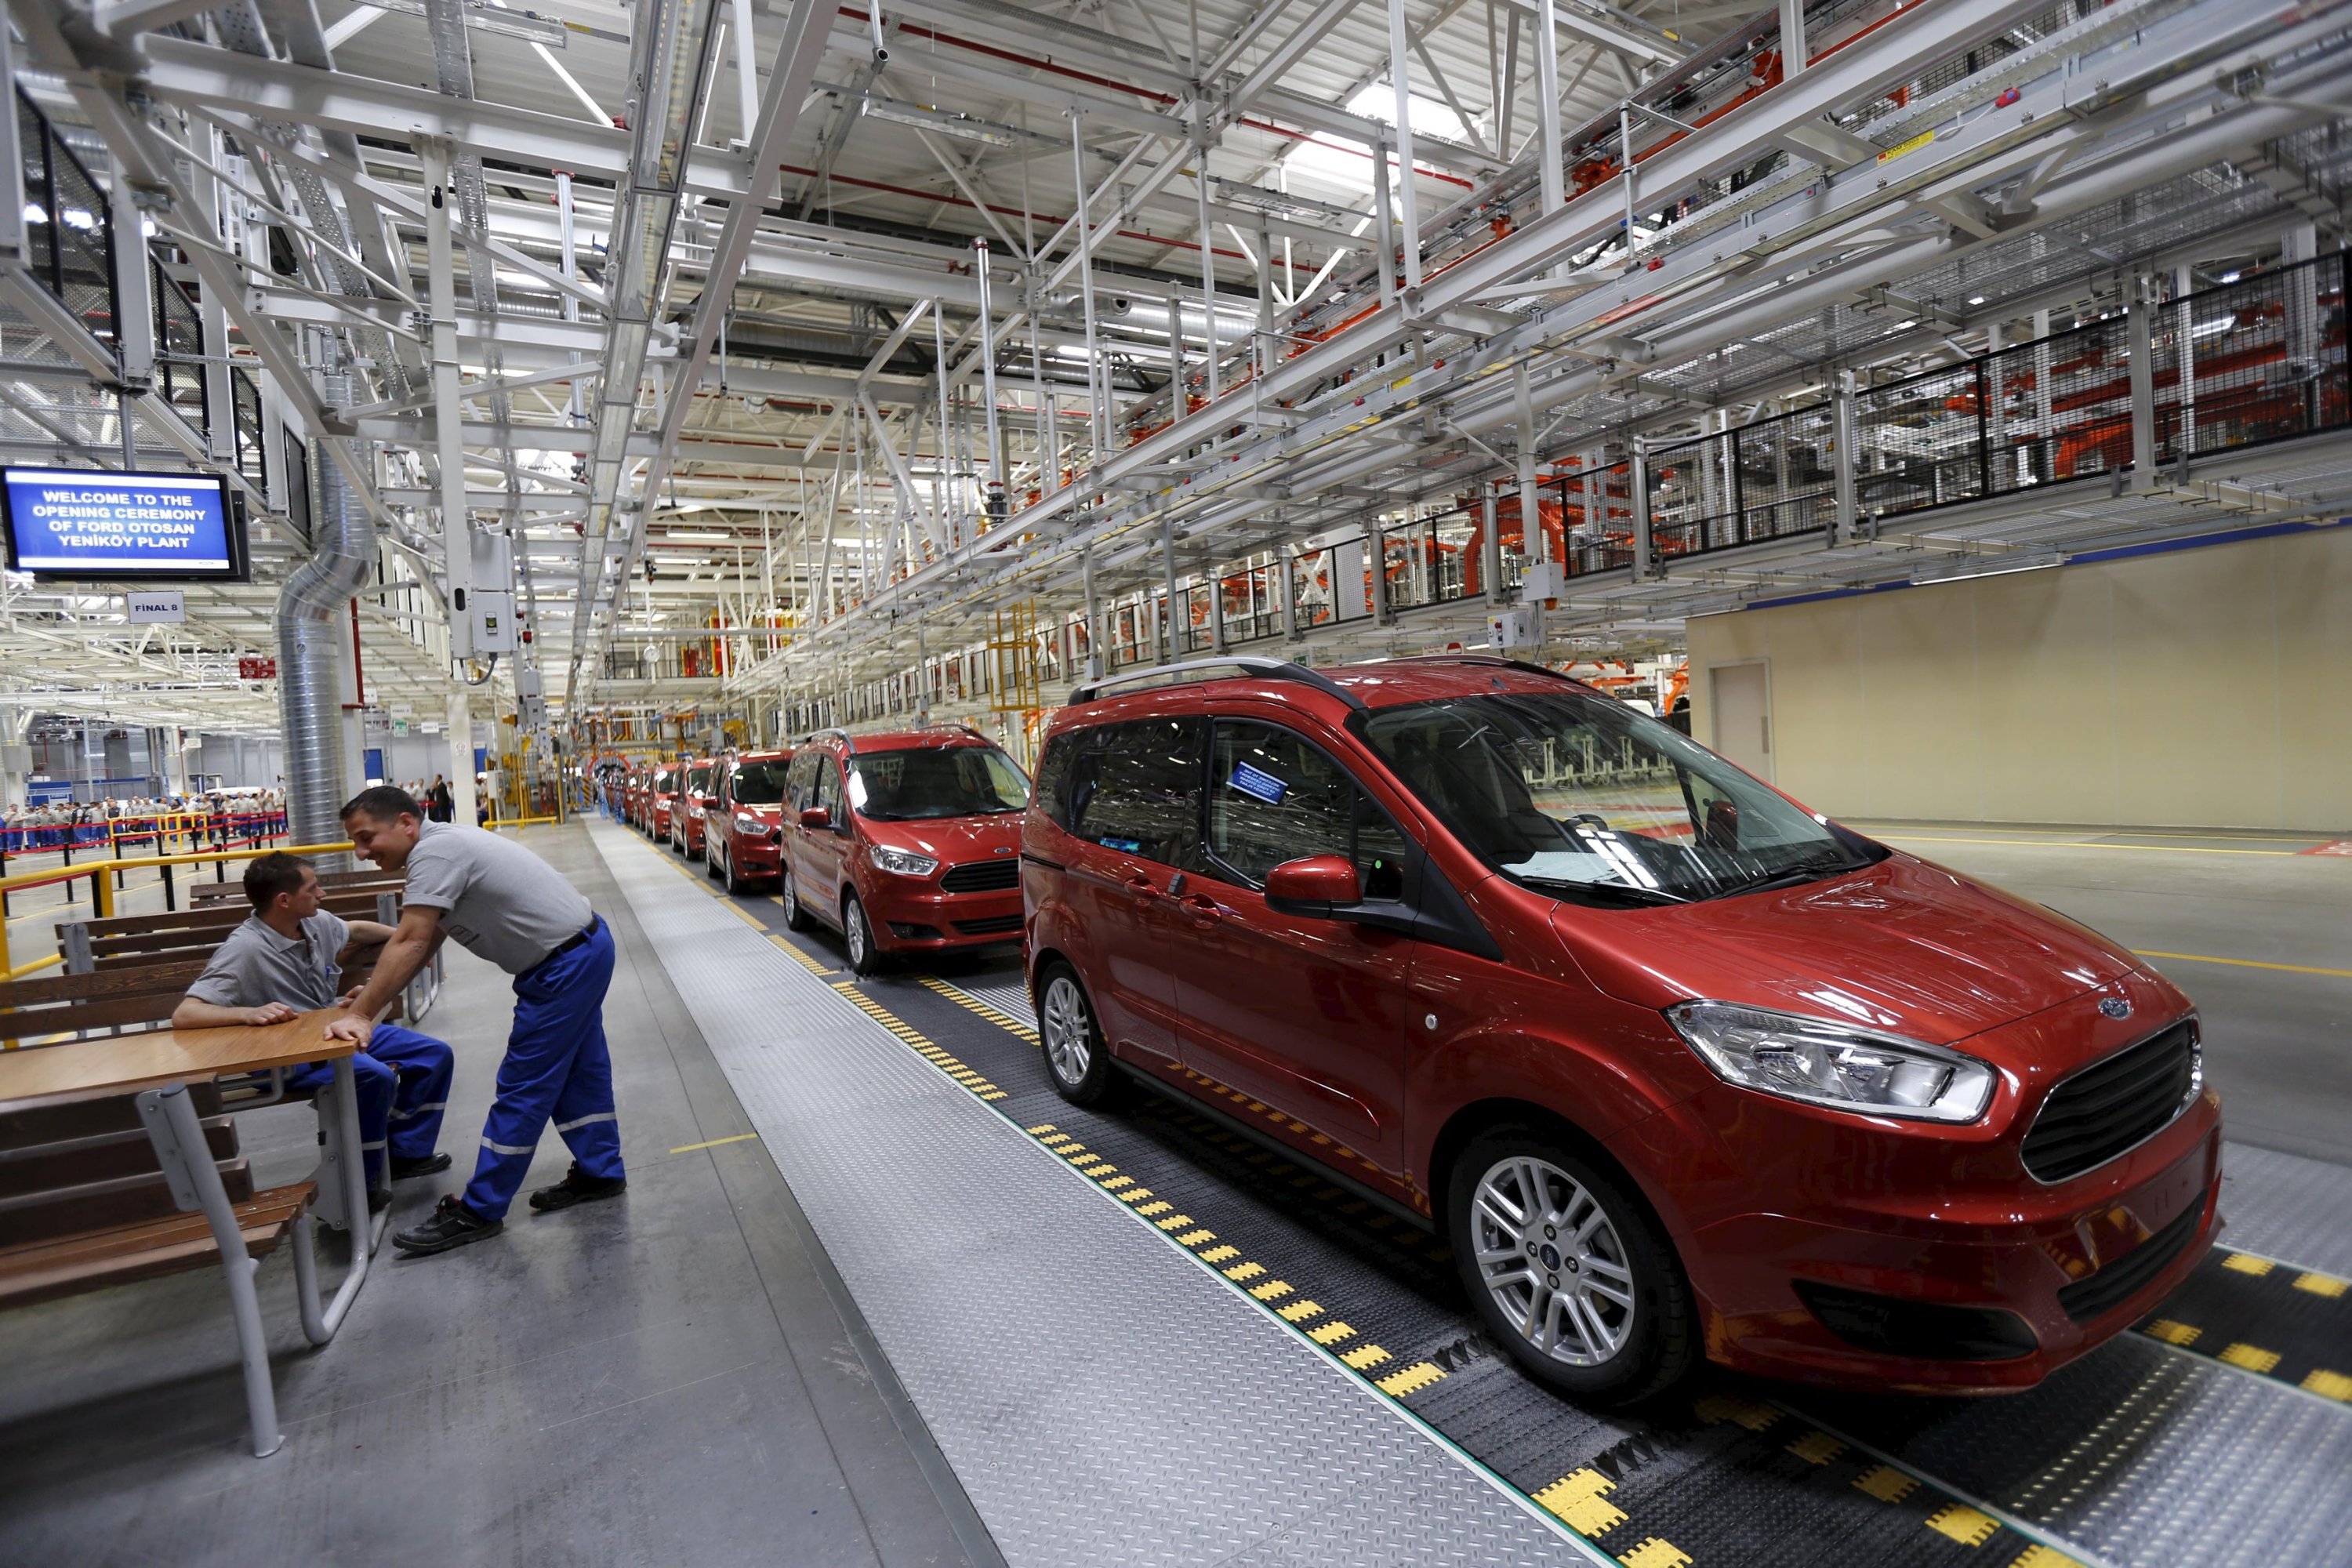 Ford Will Build Volkswagen Transporter Van At Its Otosan Assembly